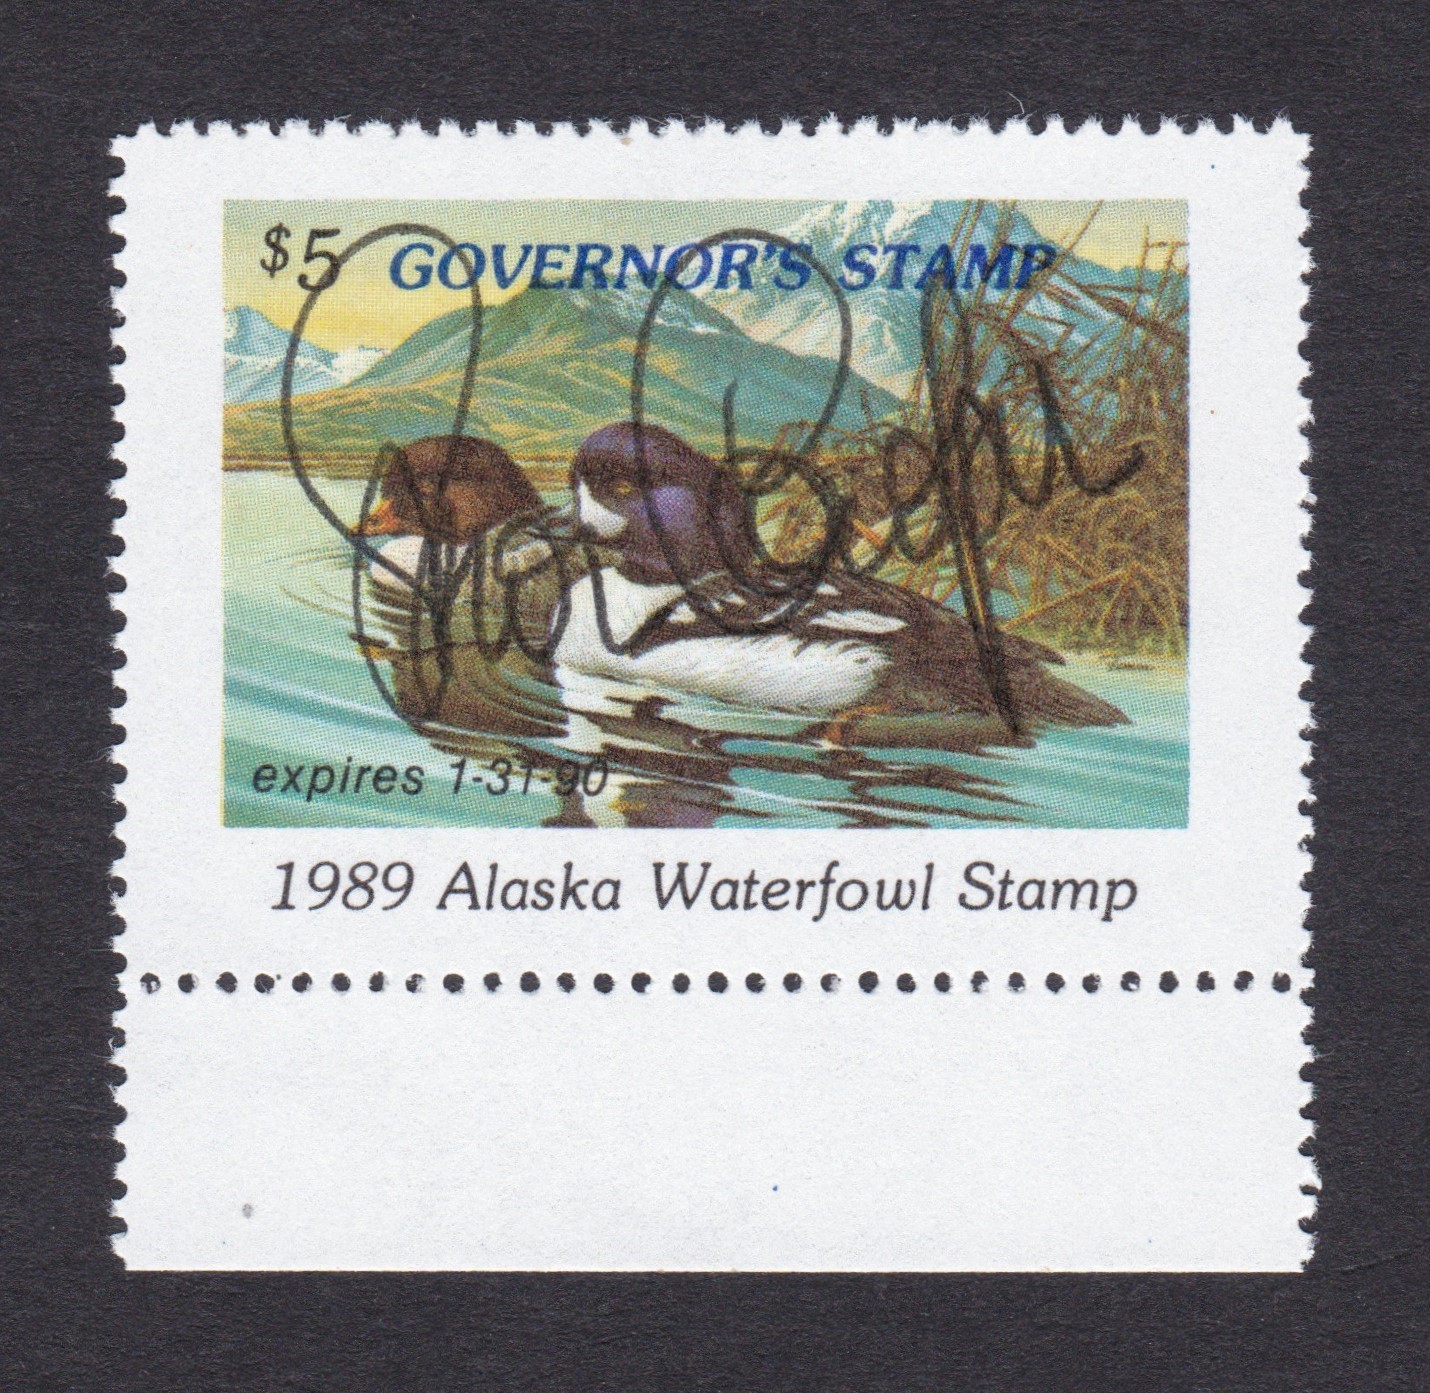 AK waterfowl W5GS $5 NH VF, 1989 Governor's Edition, hand signed by Steve Cowper P